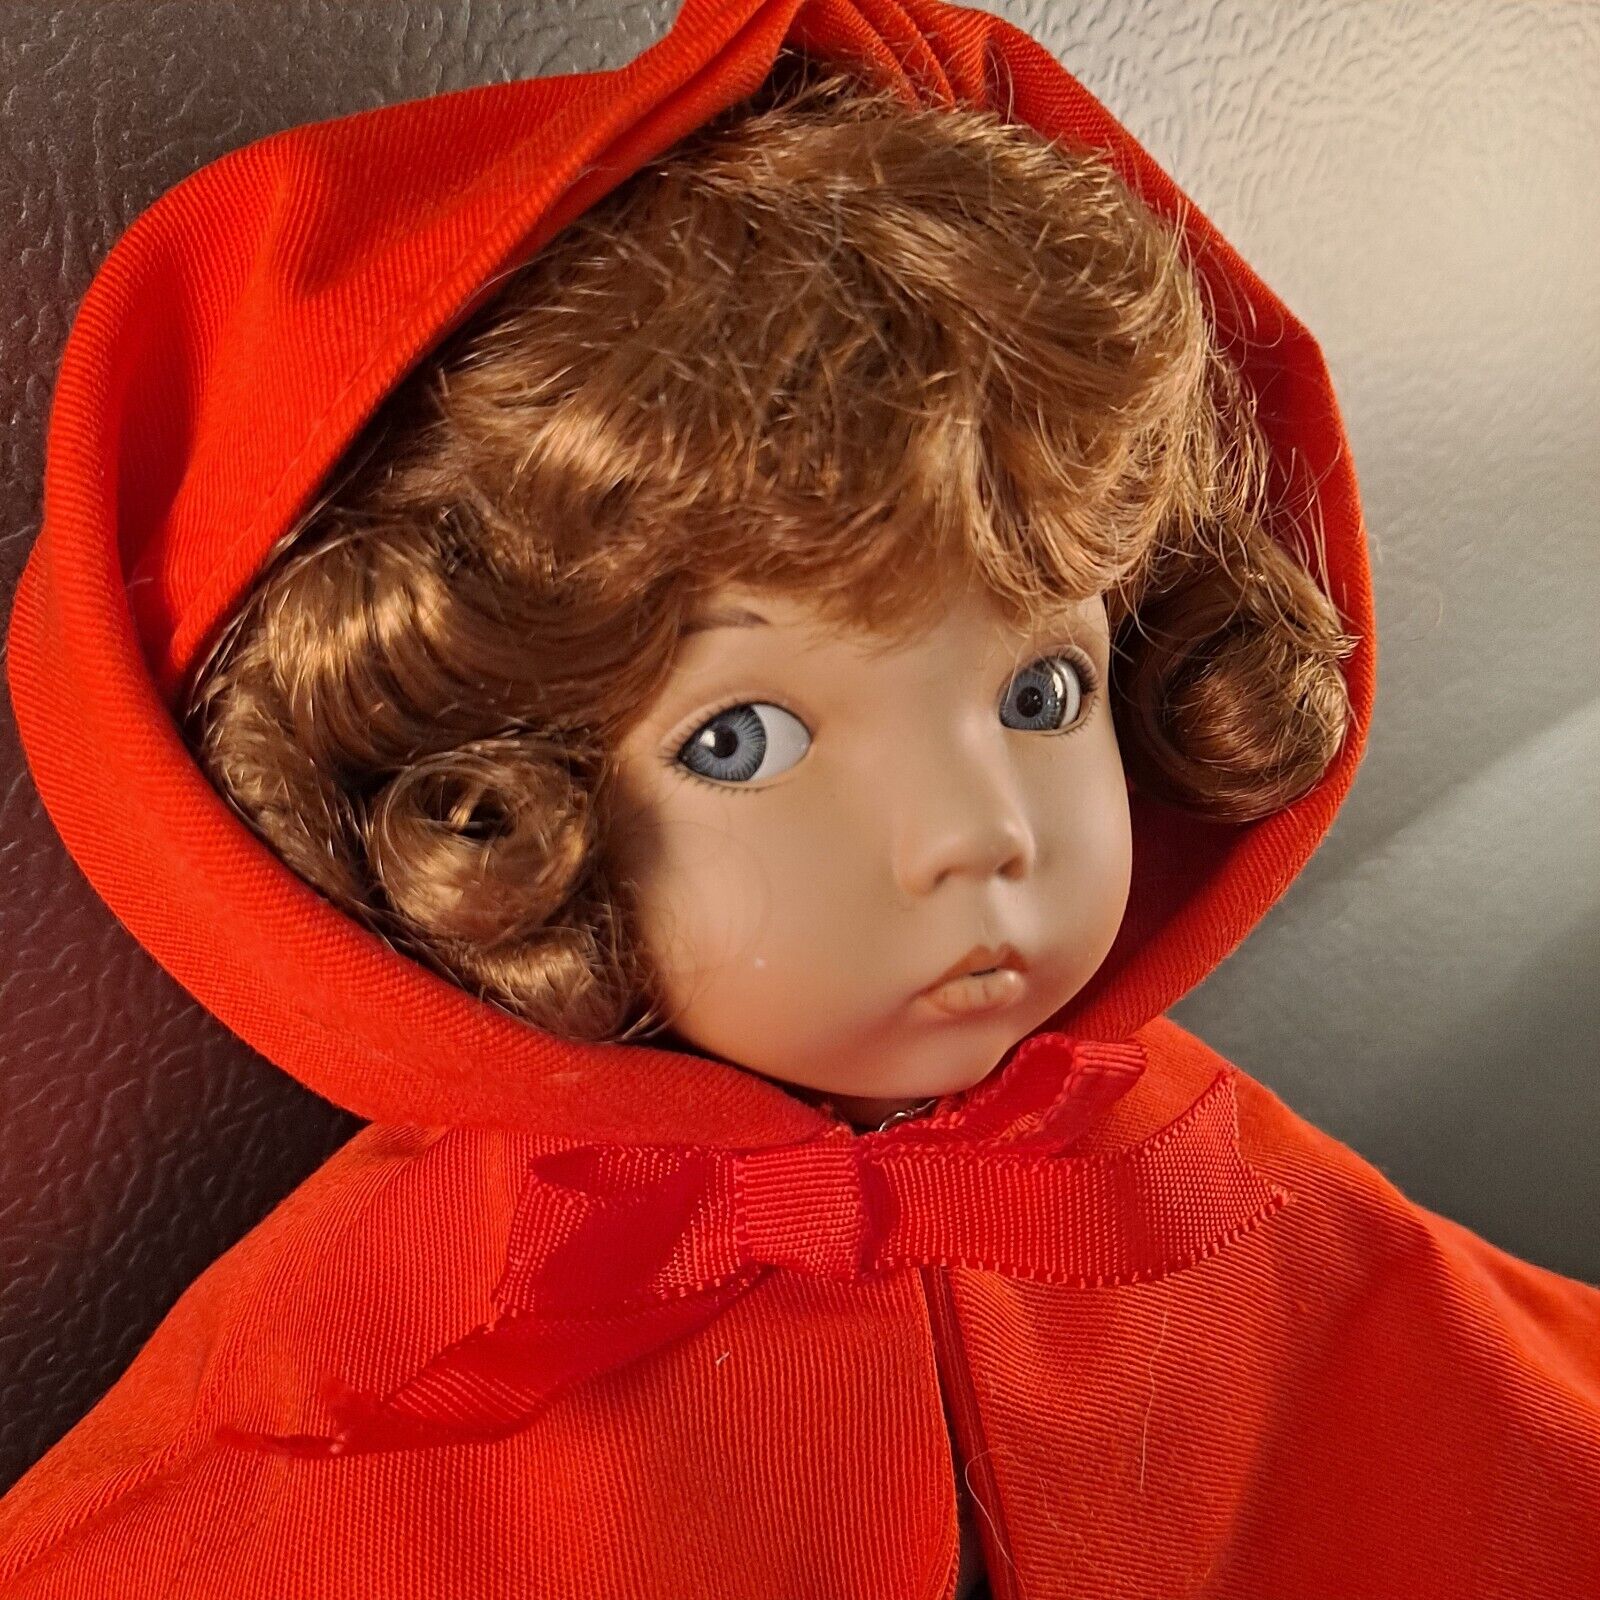 Vtg Porcelain Doll  Little Red Riding Hood Collectible With Certificate Flaw